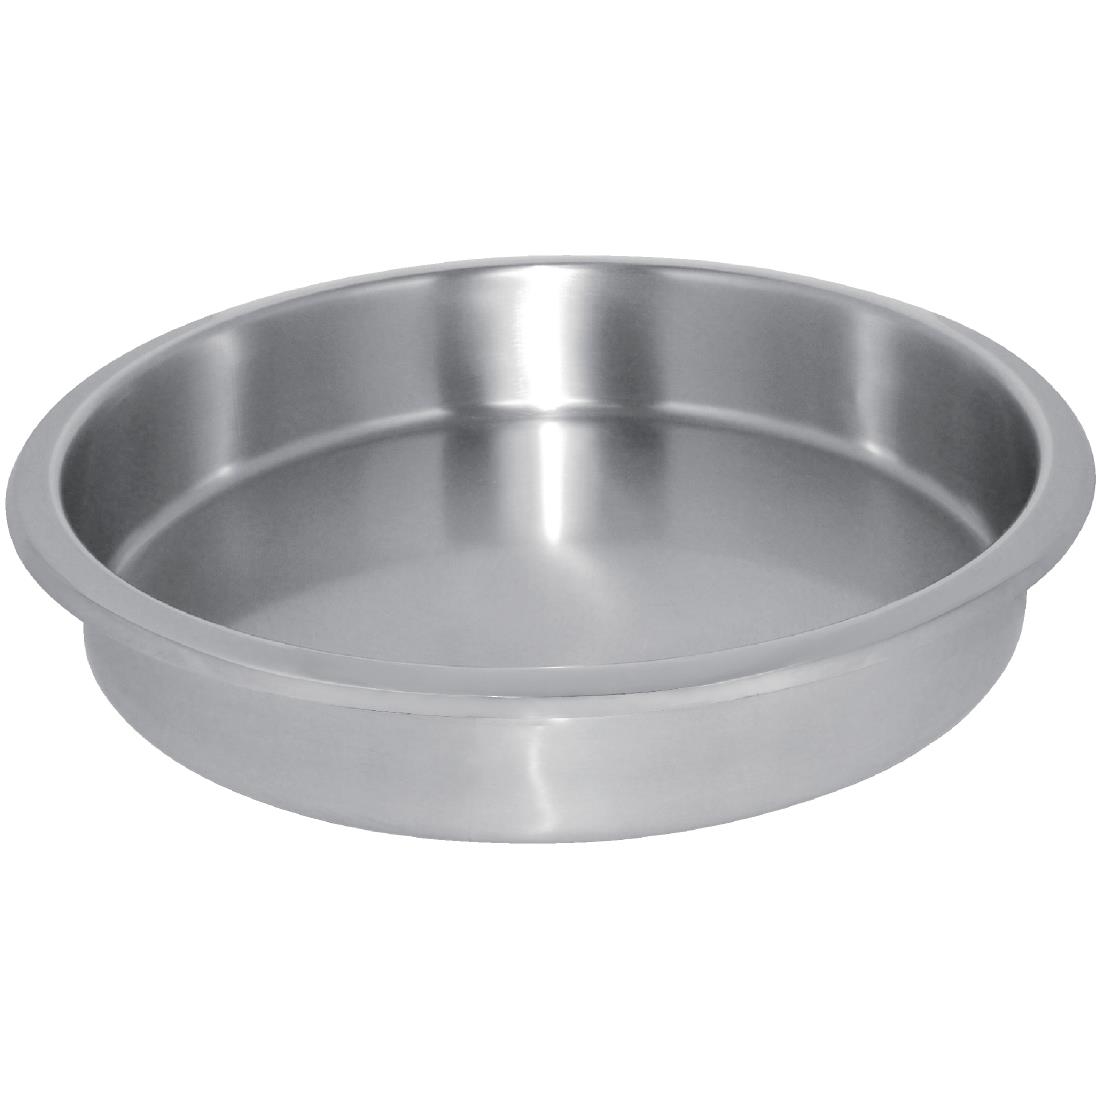 Spare Food Pan for Olympia Chafing Dish